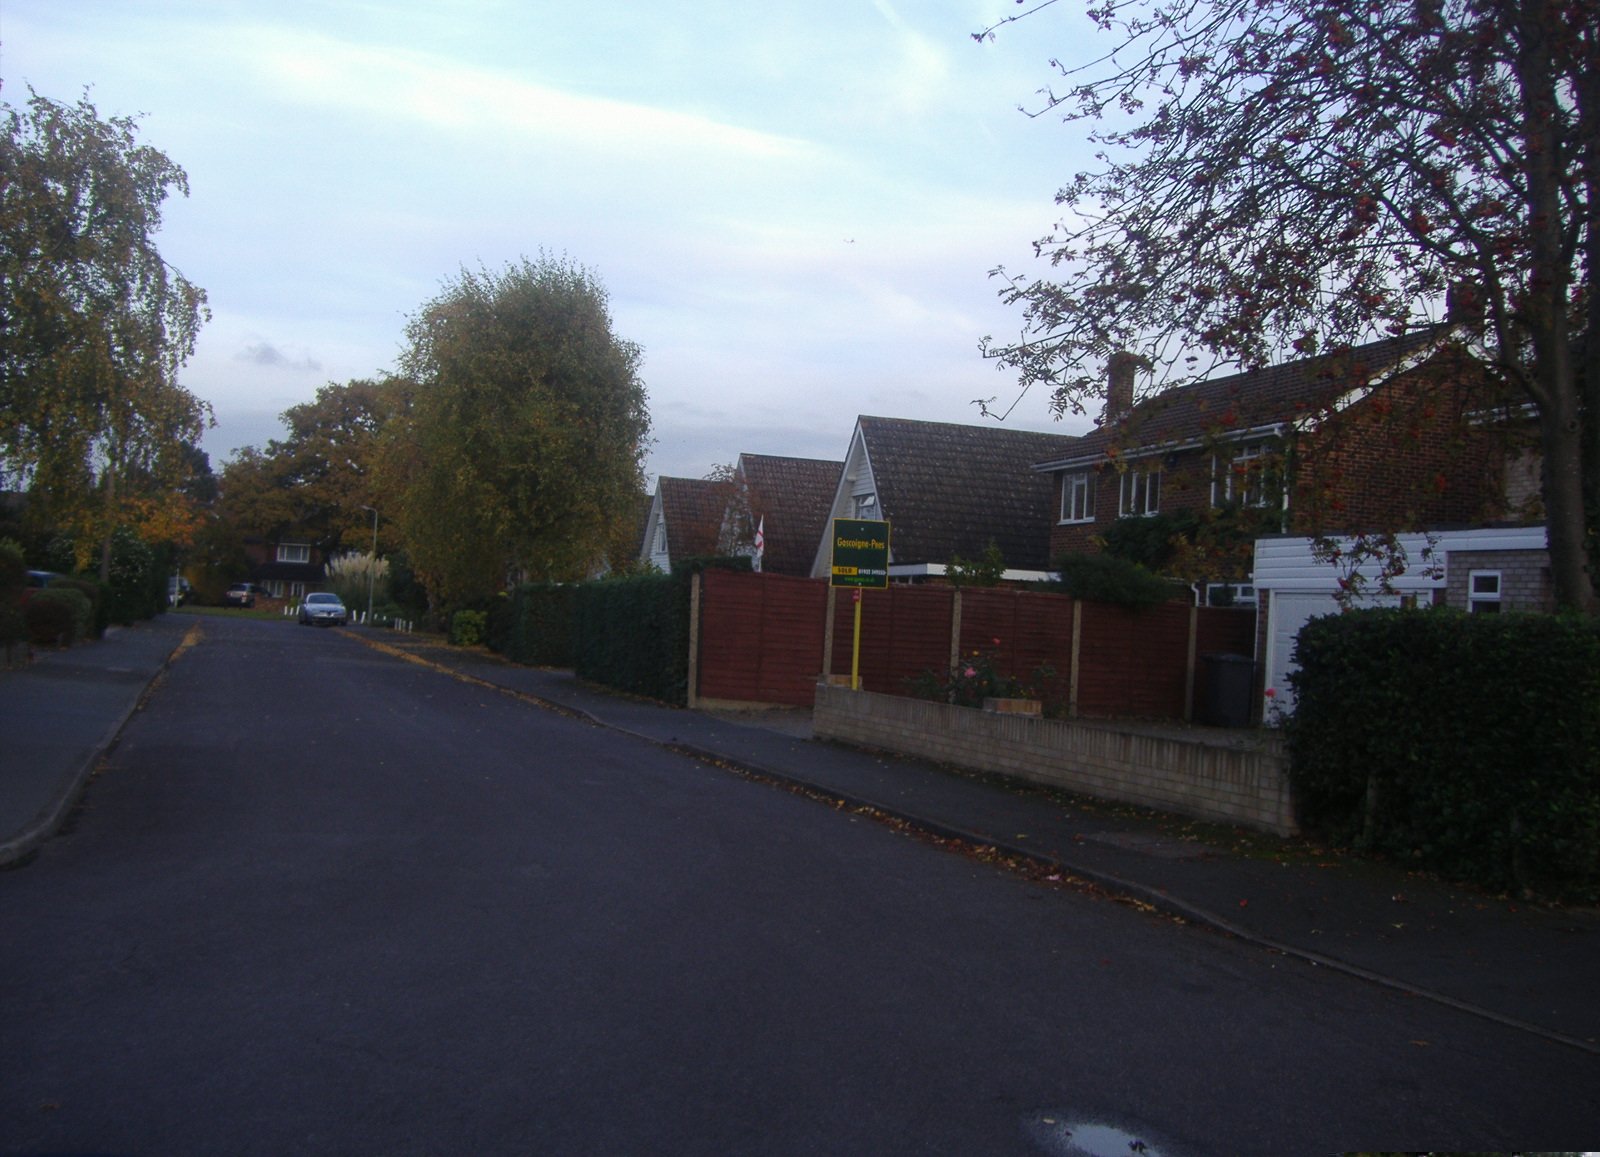 a long stretch of road next to houses